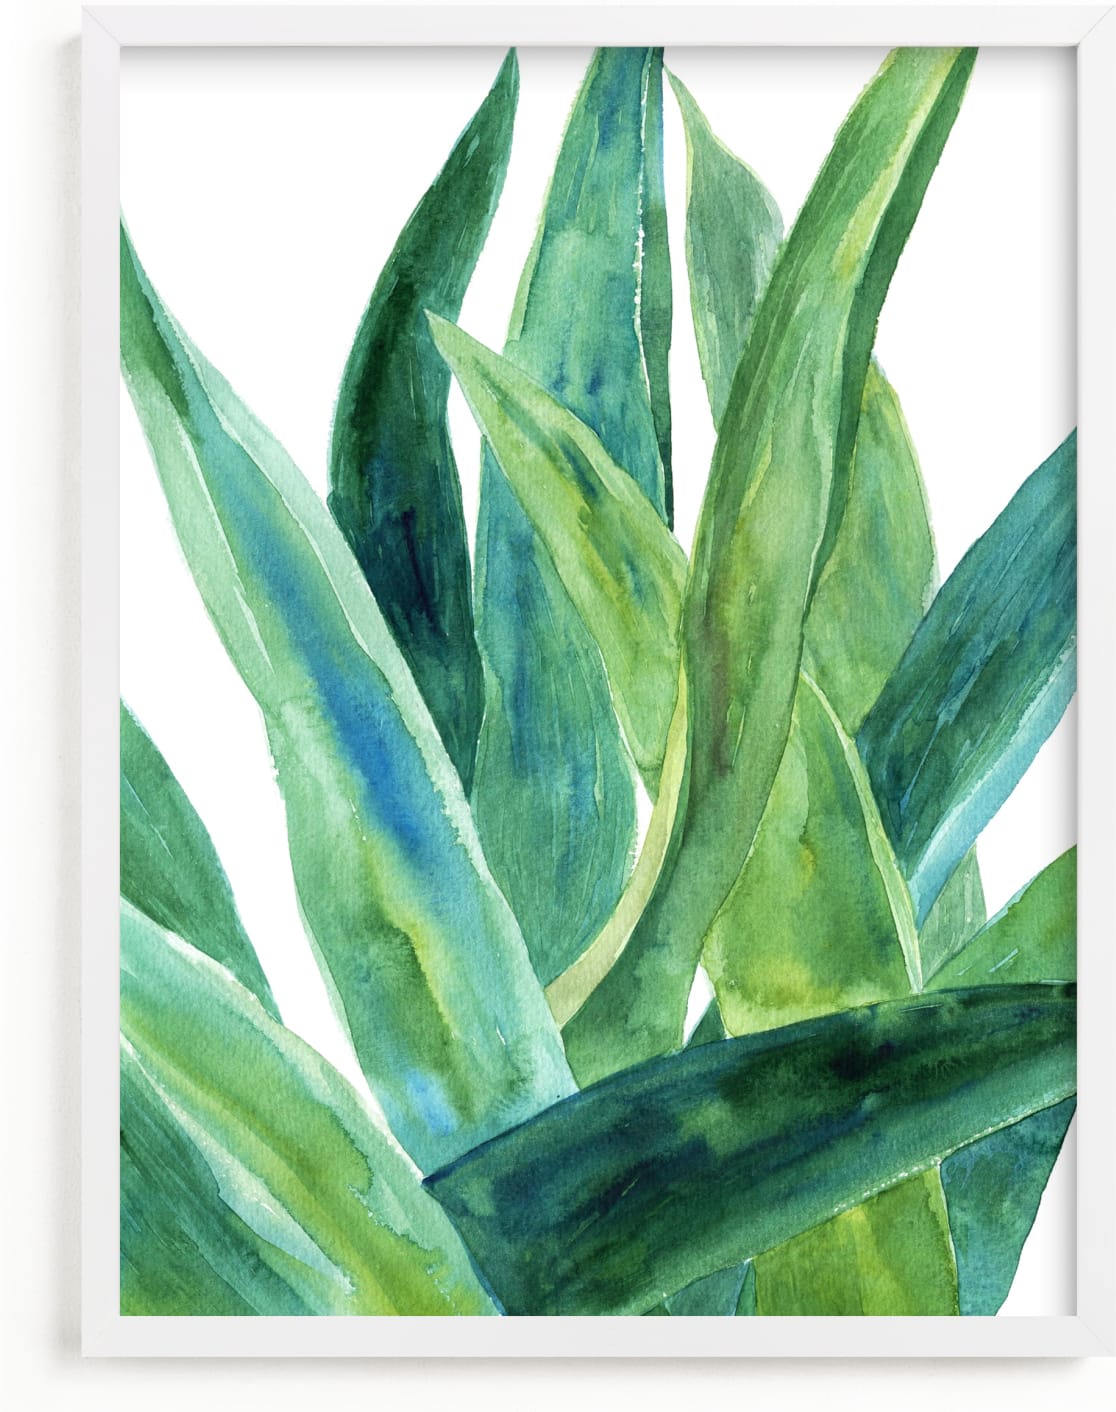 This is a blue art by Alexandra Dzh called Tropical plants I.